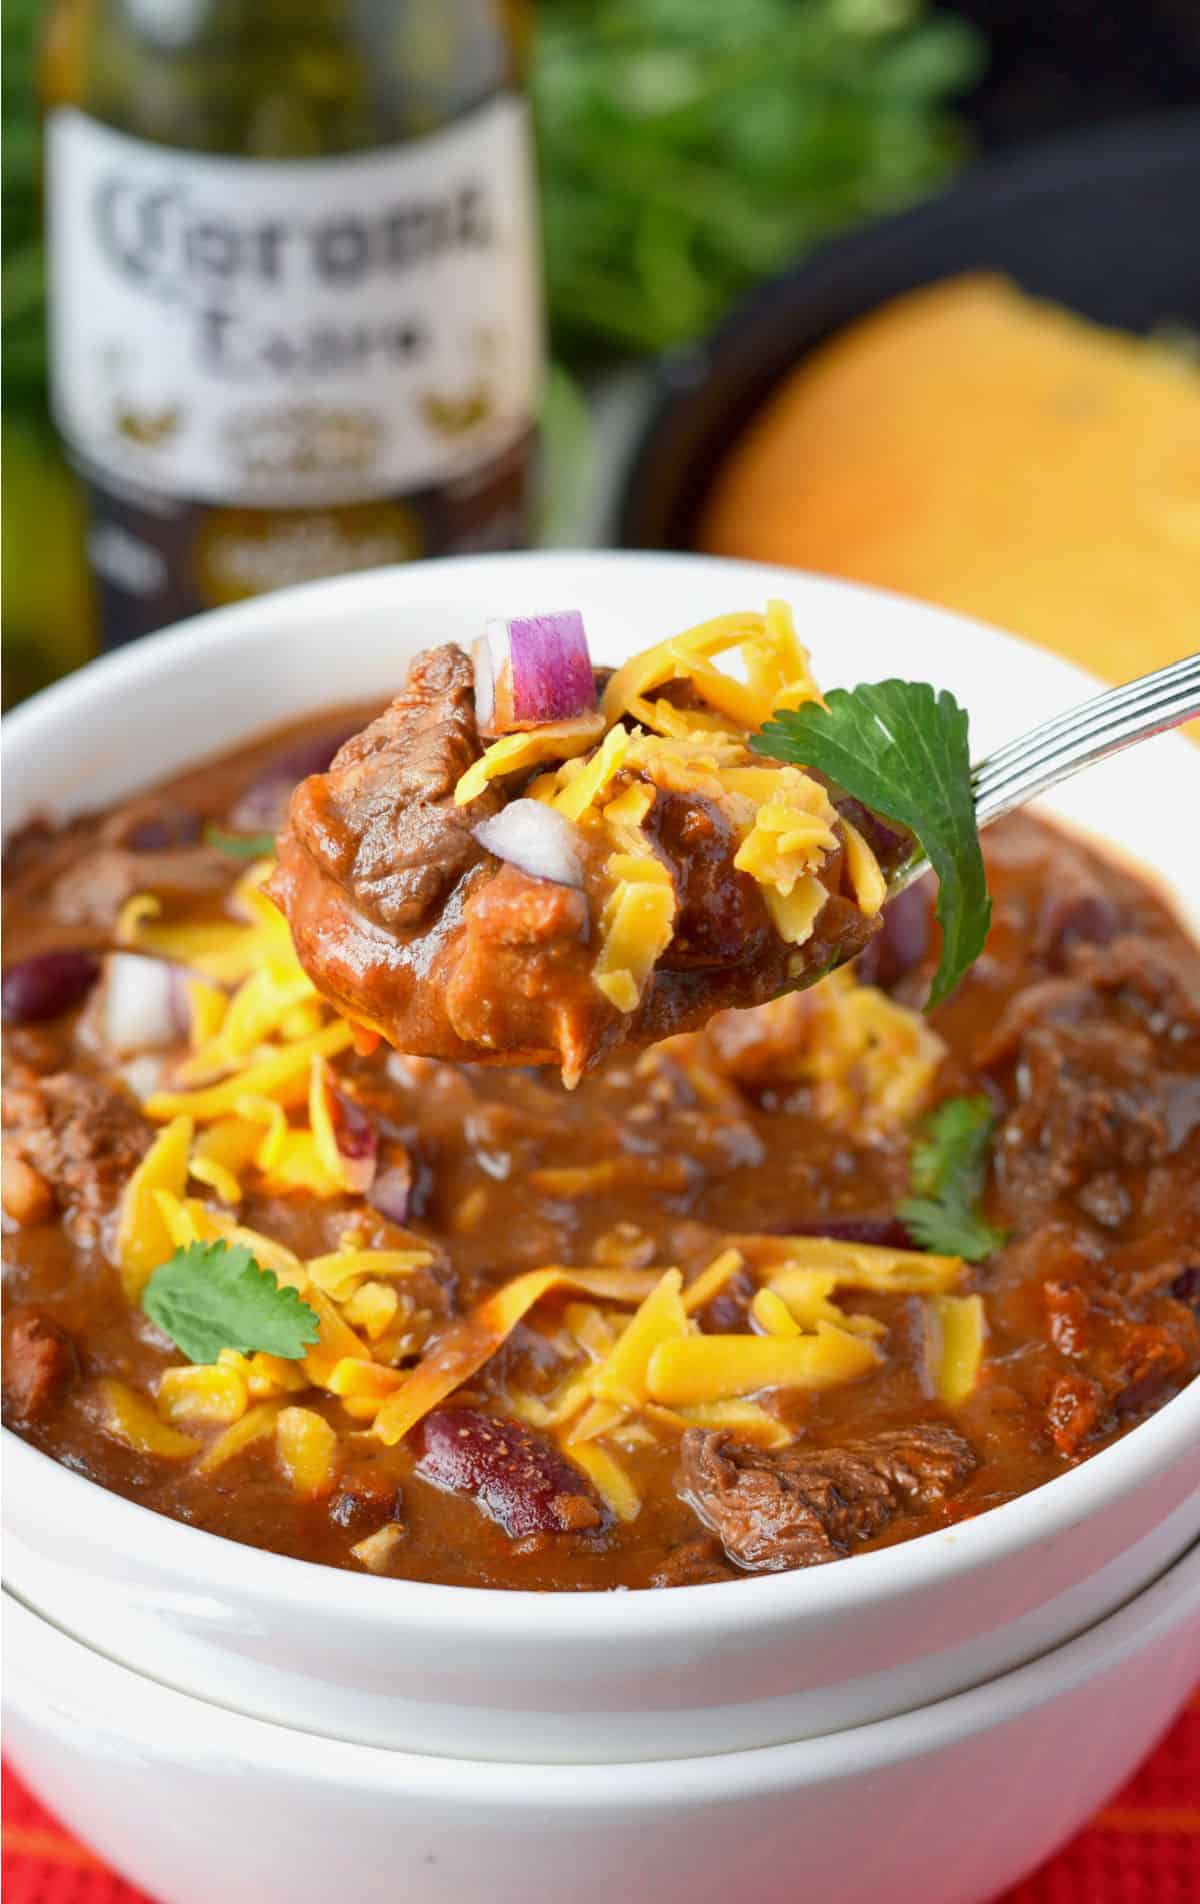 chili in a bowl with a spoon.